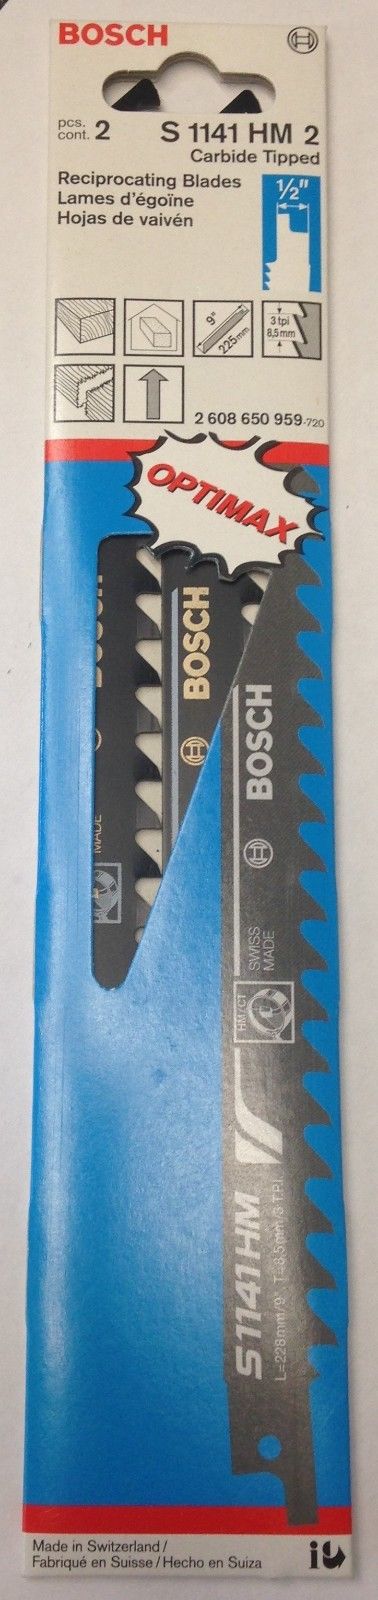 Bosch S1141HM2 9" x 3 TPI Carbide Tipped Reciprocating Saw Blades 2 Pack